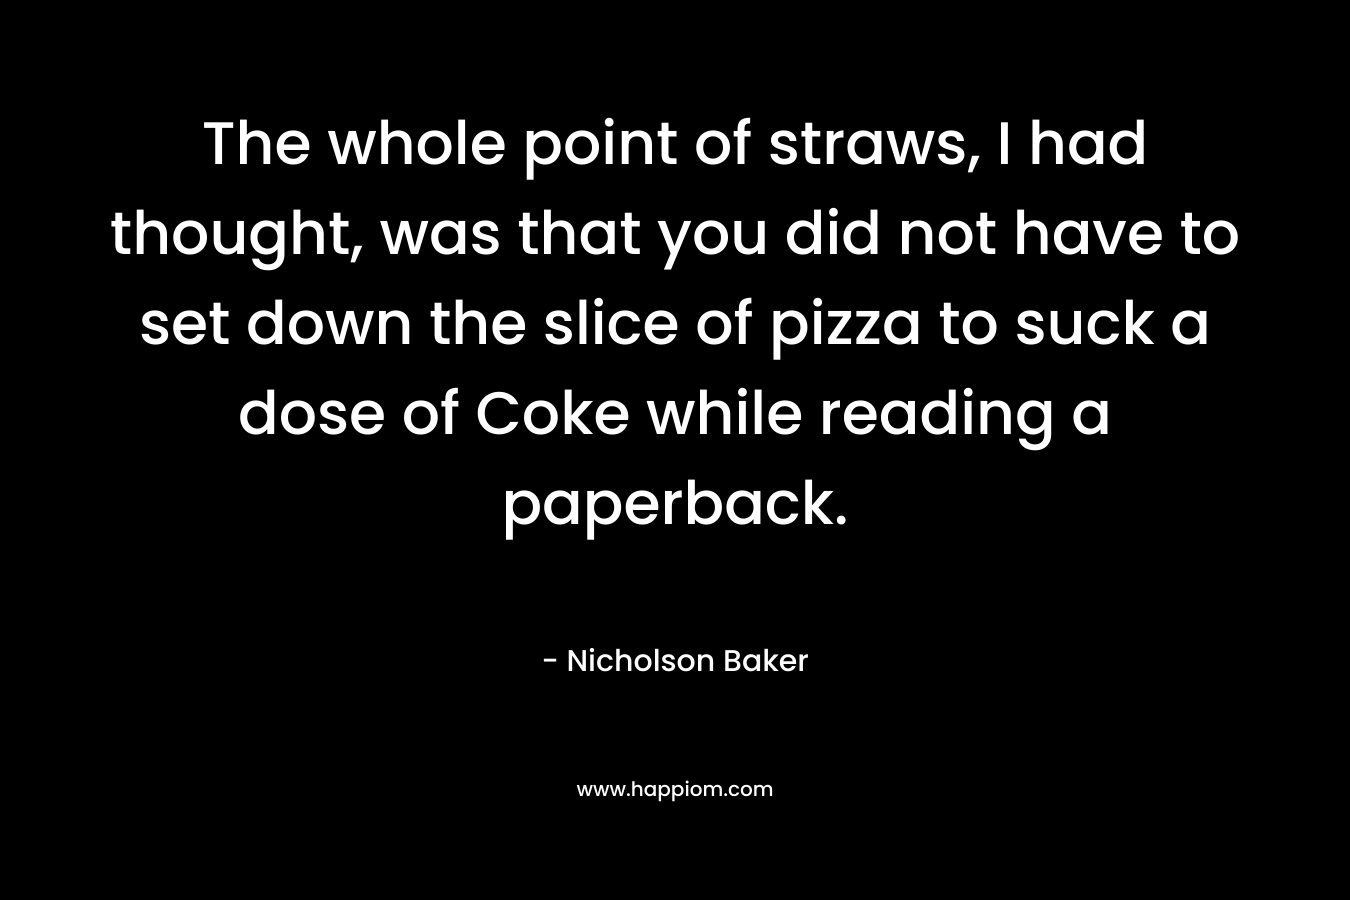 The whole point of straws, I had thought, was that you did not have to set down the slice of pizza to suck a dose of Coke while reading a paperback. – Nicholson Baker